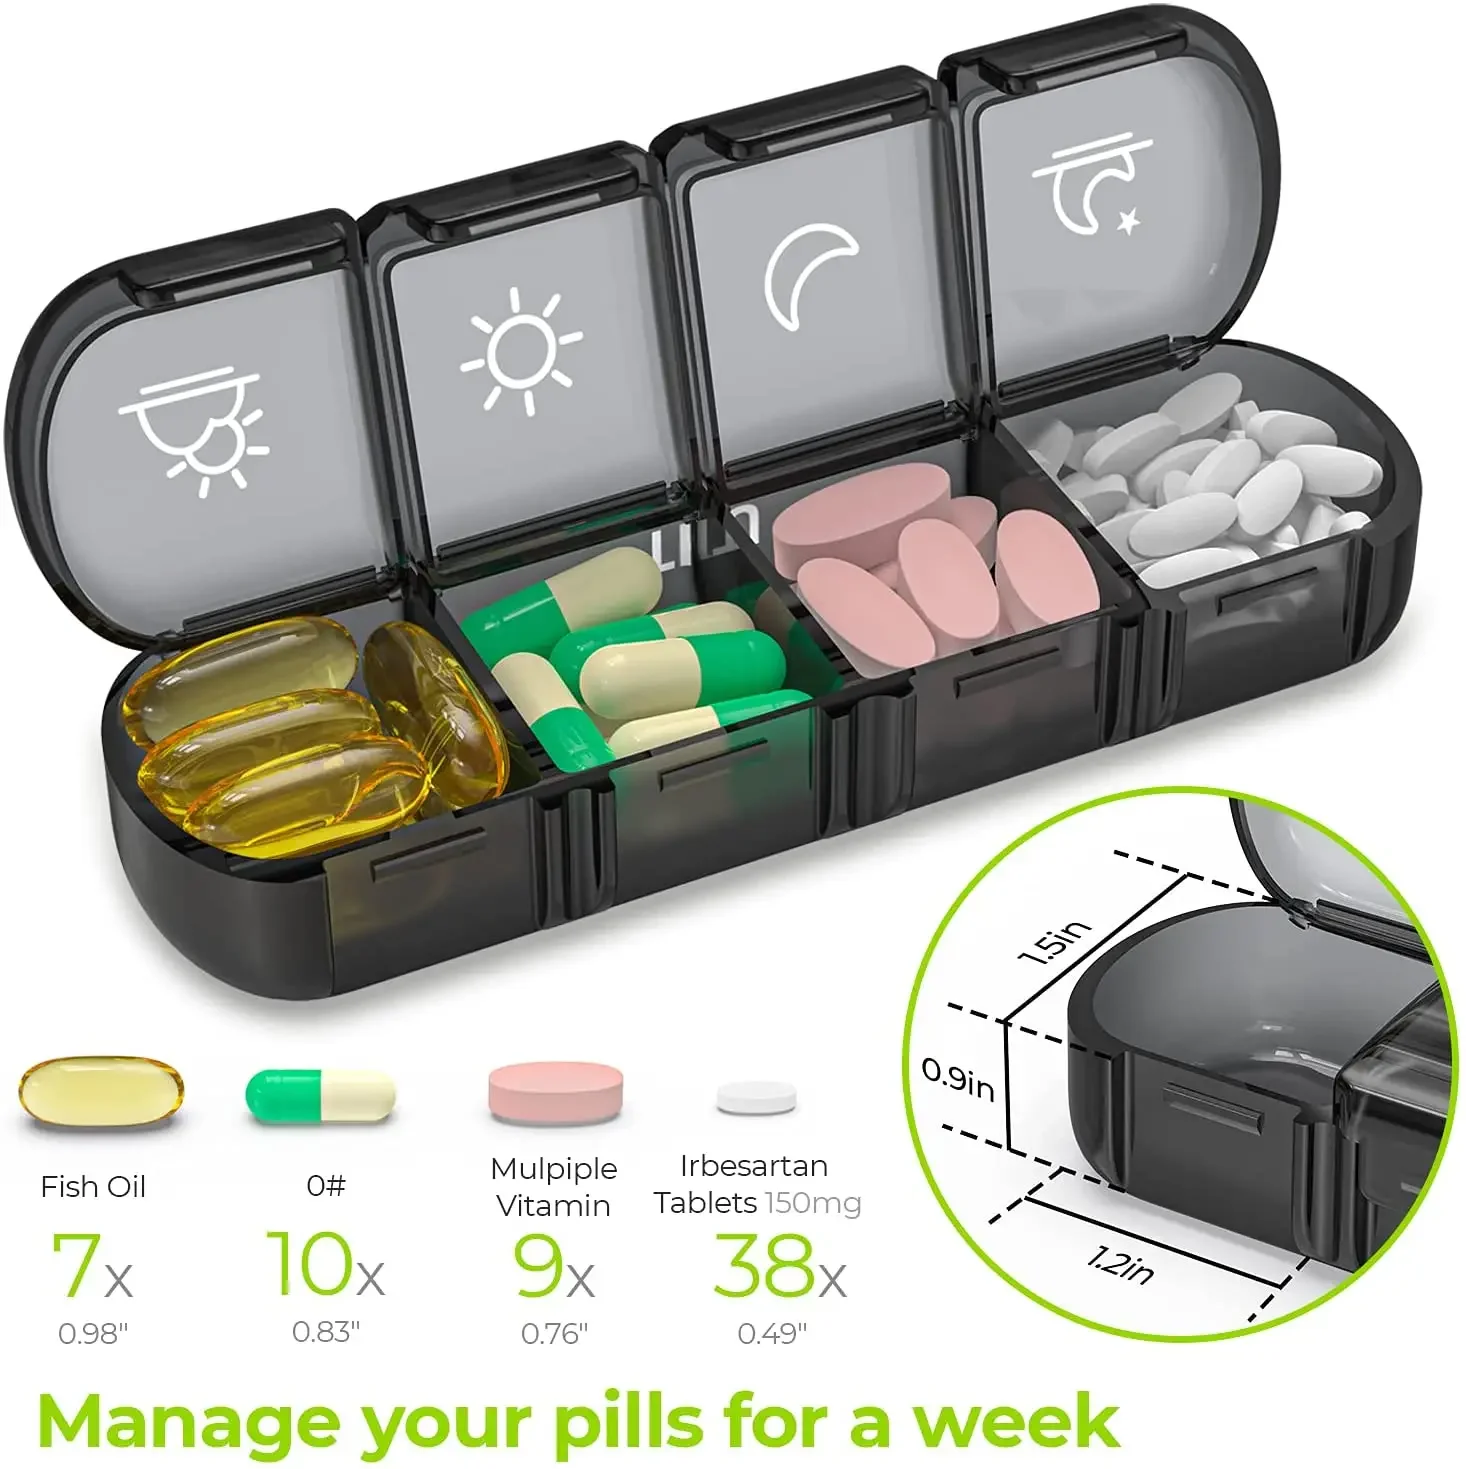 https://ae01.alicdn.com/kf/S8a3dca362b50438db7e5a11de2741ac5Y/ATUBAN-Weekly-Pill-Organizer-4-Times-a-Day-with-7-Daily-Large-Pill-Box-Cases-to.jpg